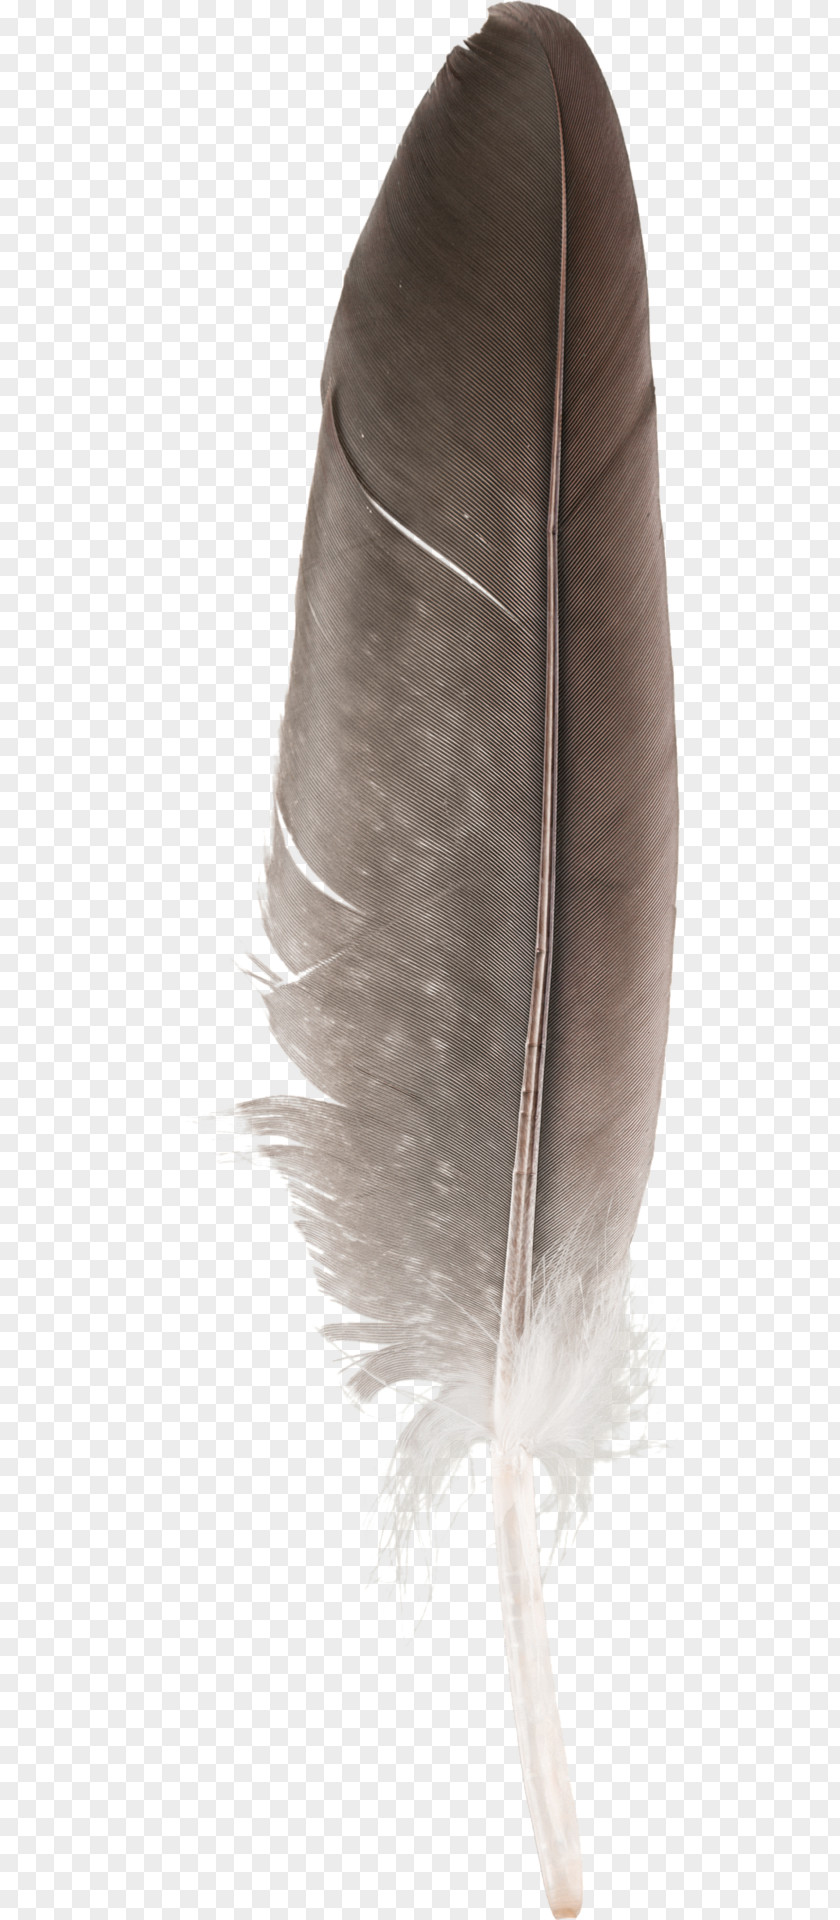 Cockatiel Bird Moulting Pet Pin Feather PNG